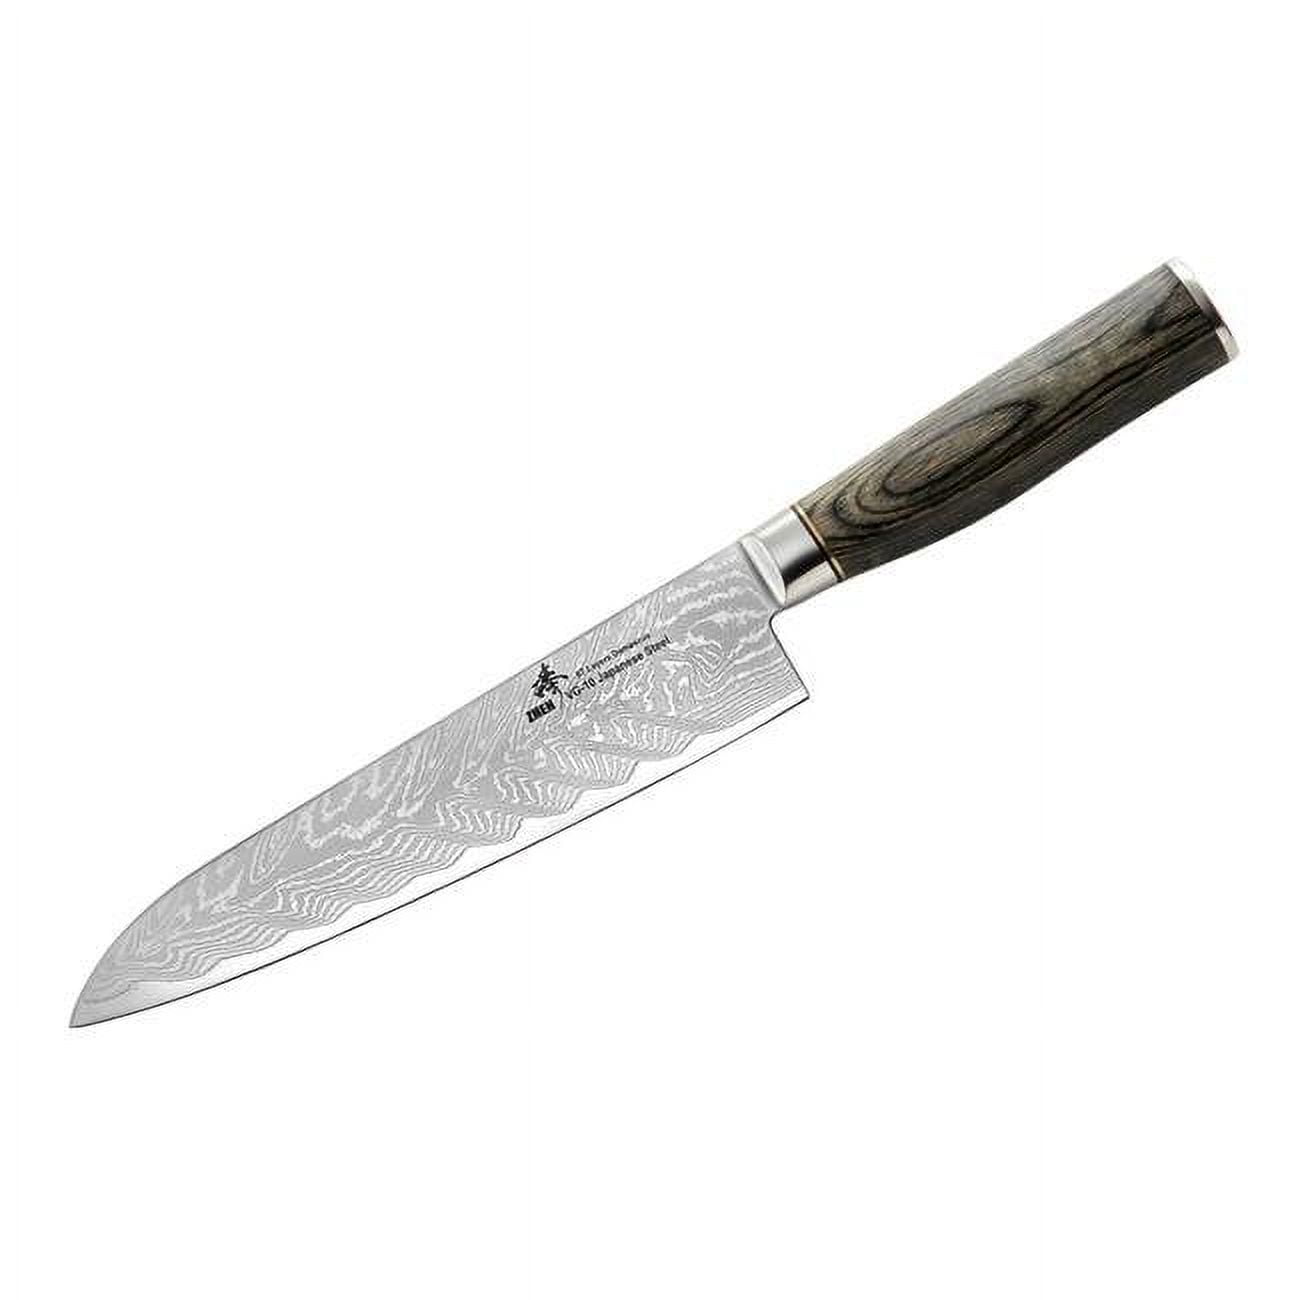 Turwho Professional Serrated Bread Knife 8 inch - Classic Damascus Pattern Japanese VG-10 Steel